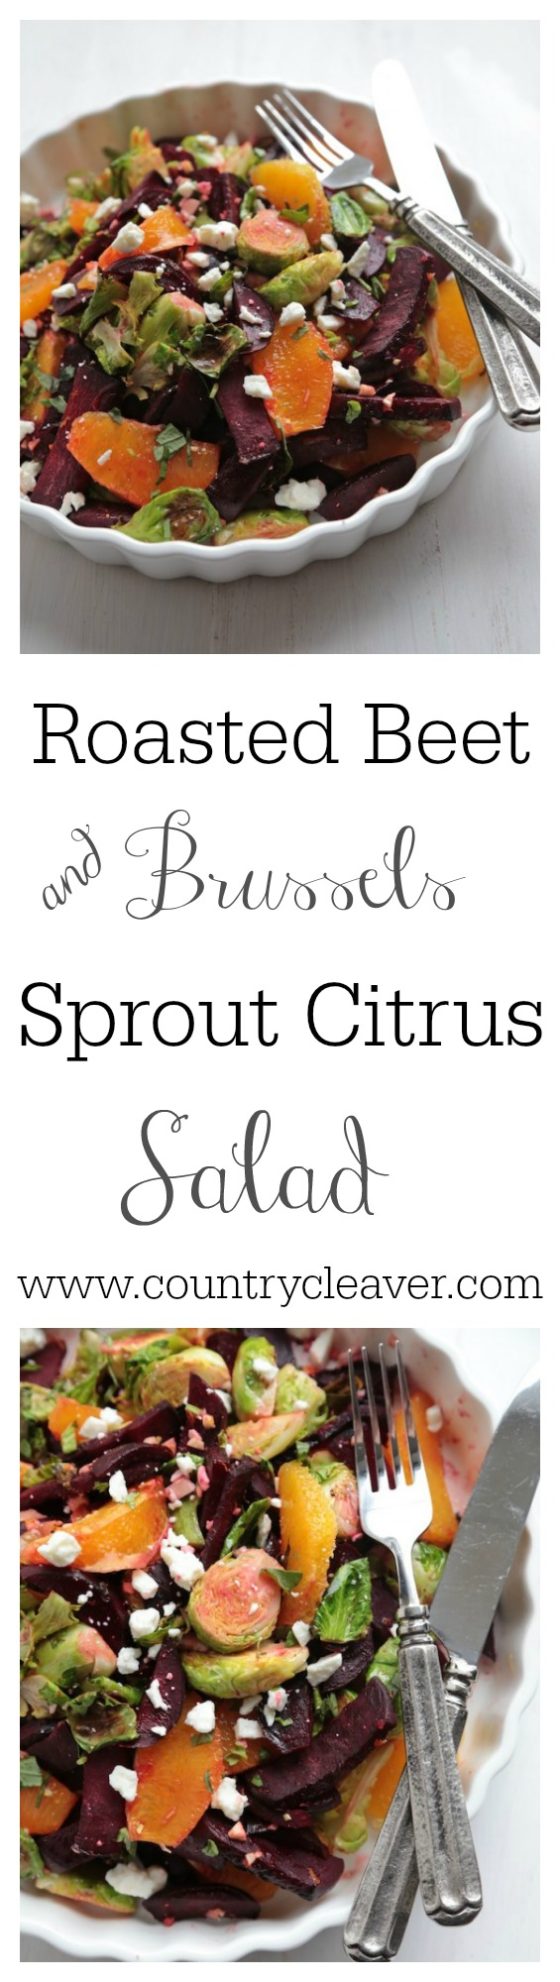 Roasted Beet and Brussels Sprout Citrus Salad- www.countrycleaver.com